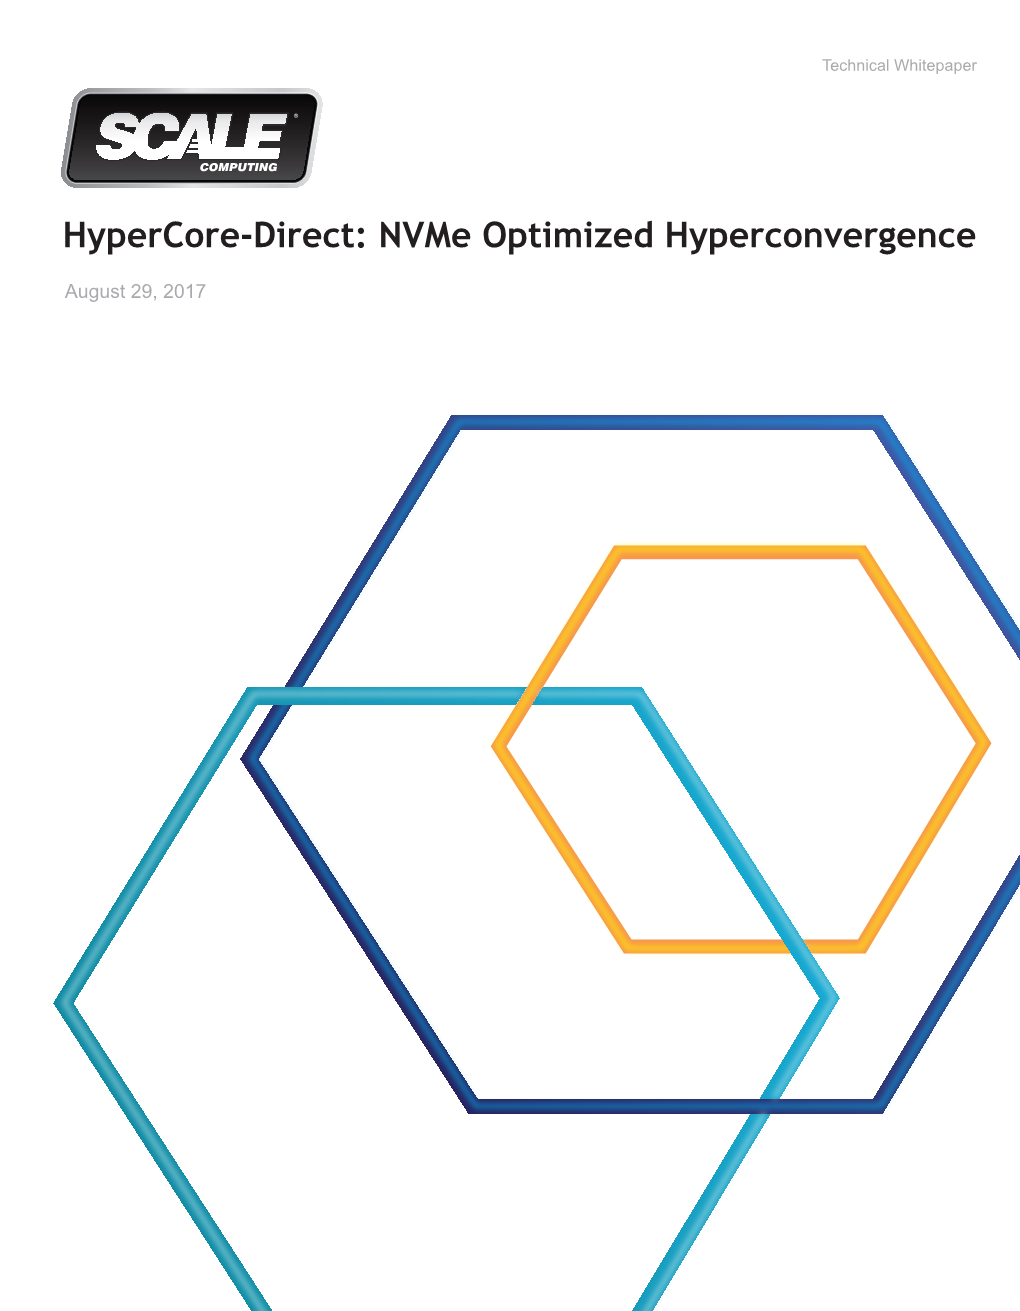 Hypercore-Direct: Nvme Optimized Hyperconvergence